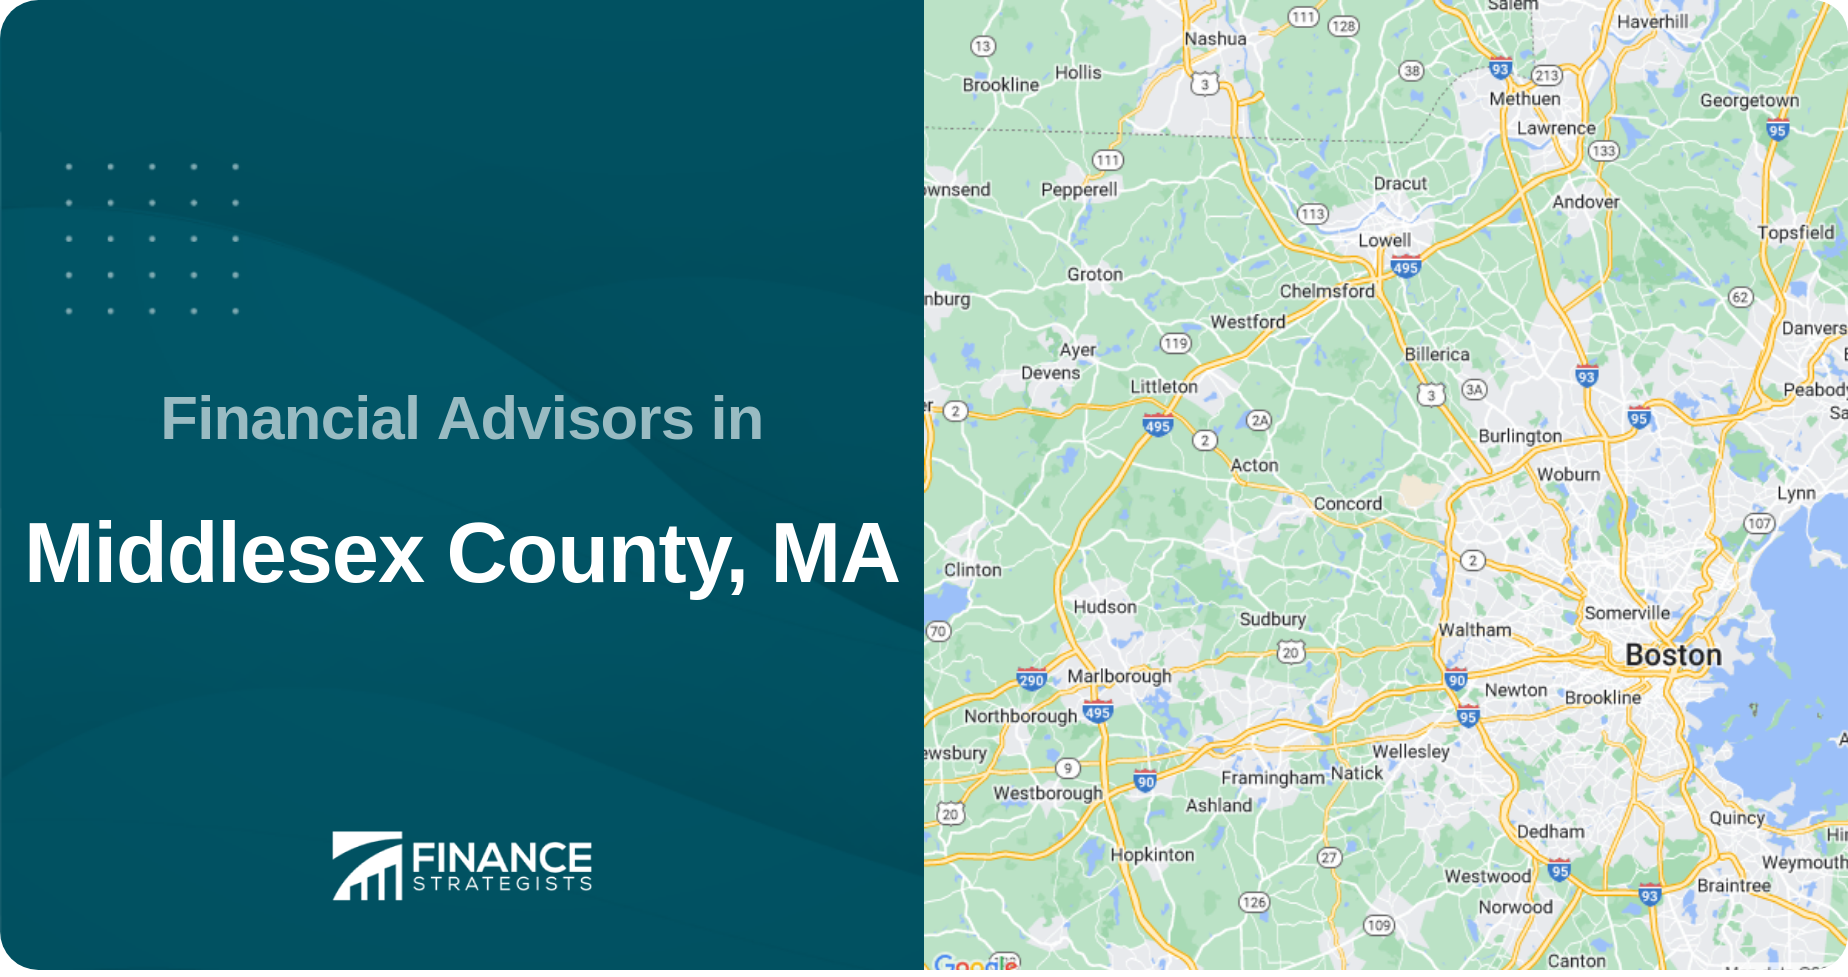 Financial Advisors in Middlesex County, MA